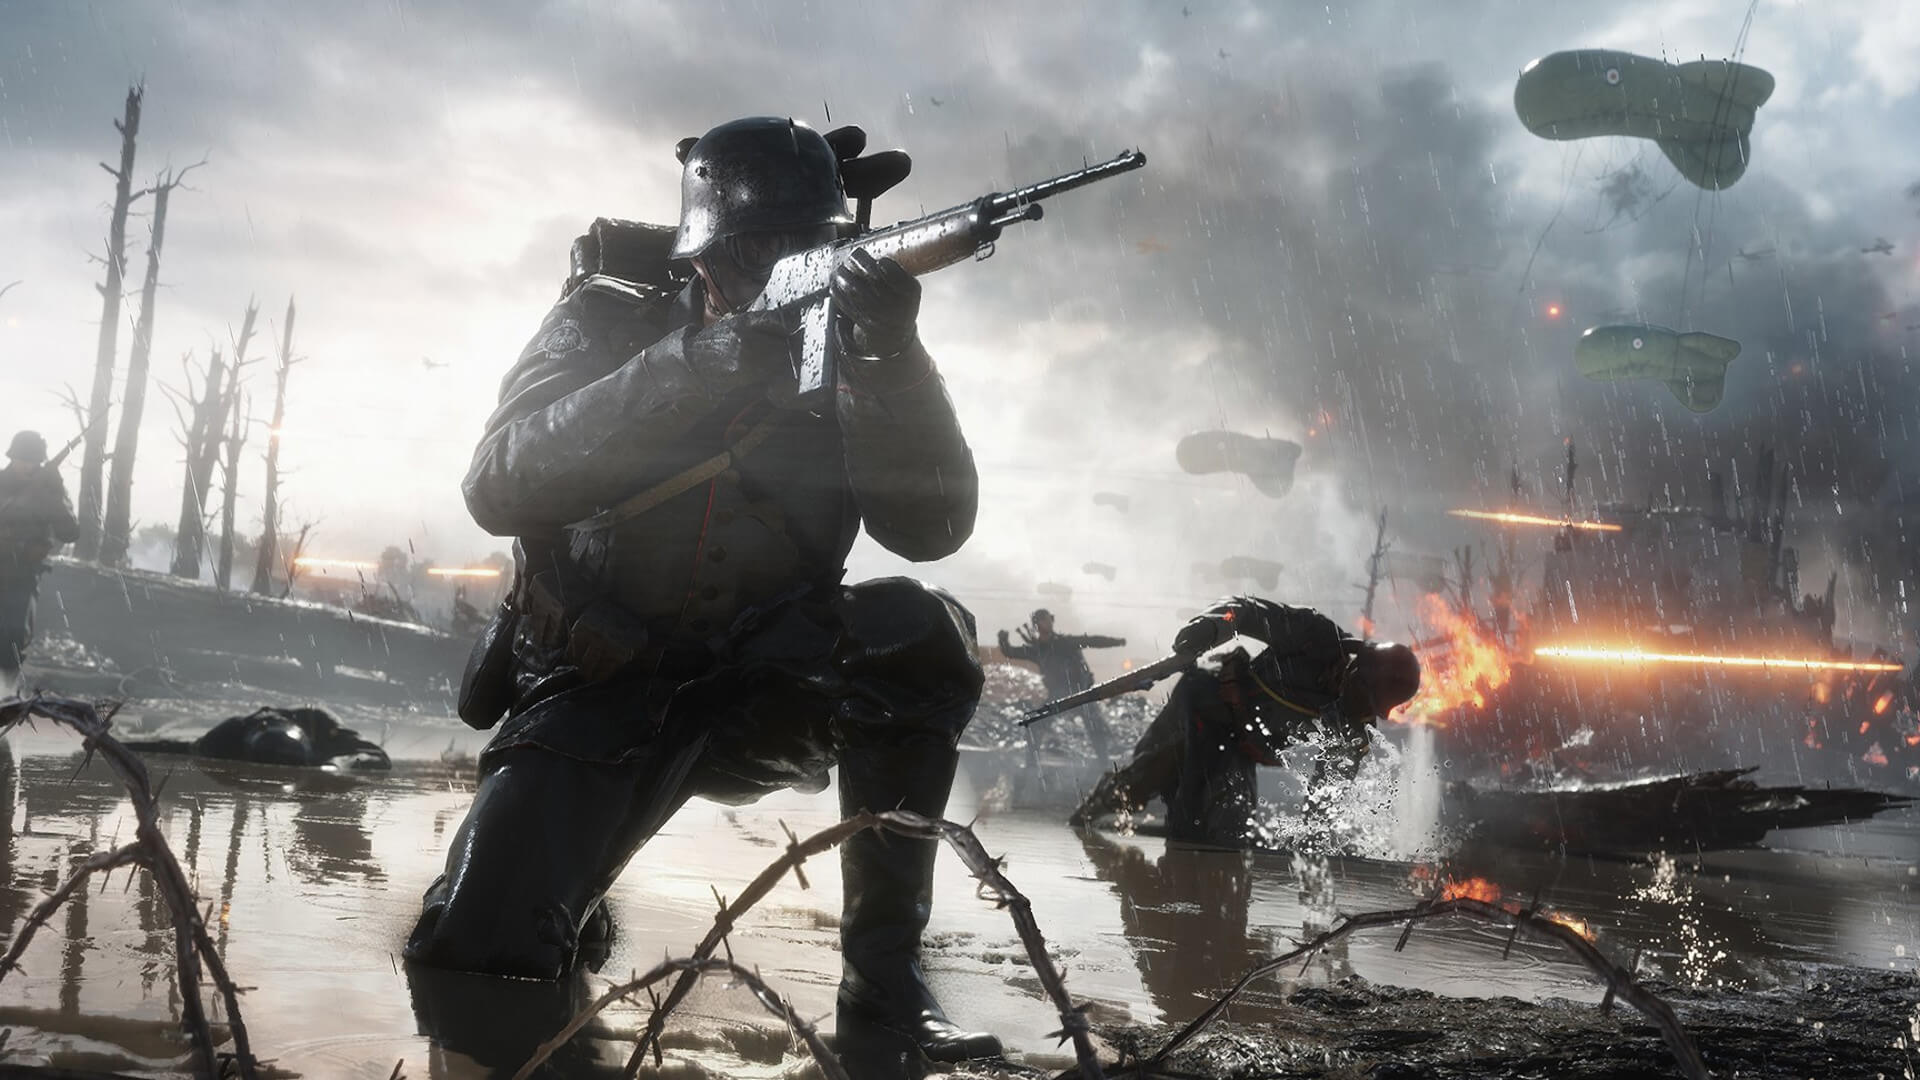 A soldier wielding a gun while his comrades fall around him in Battlefield 1